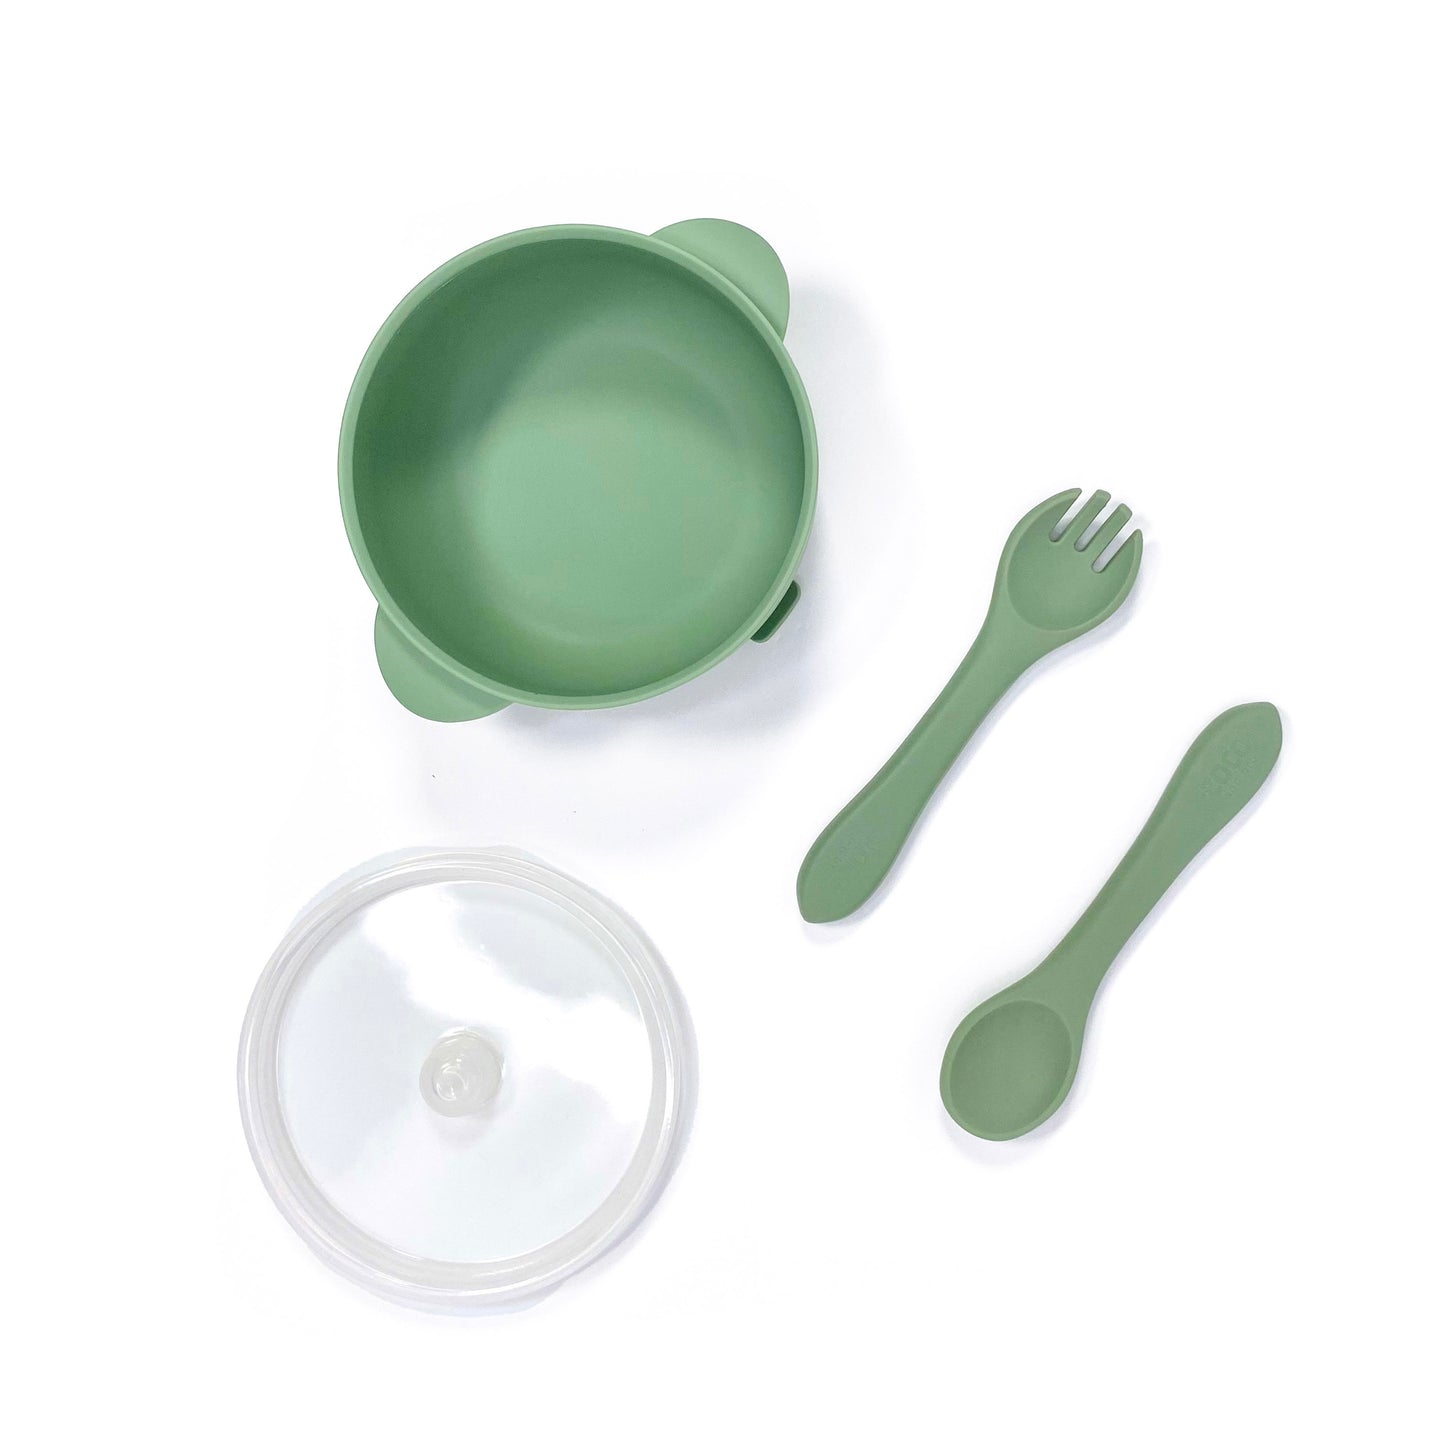 A forest green silicone children’s feeding set, including silicone bowl with lid and matching silicone cutlery. Image shows the bowl, lid and cutlery separately, from above. 